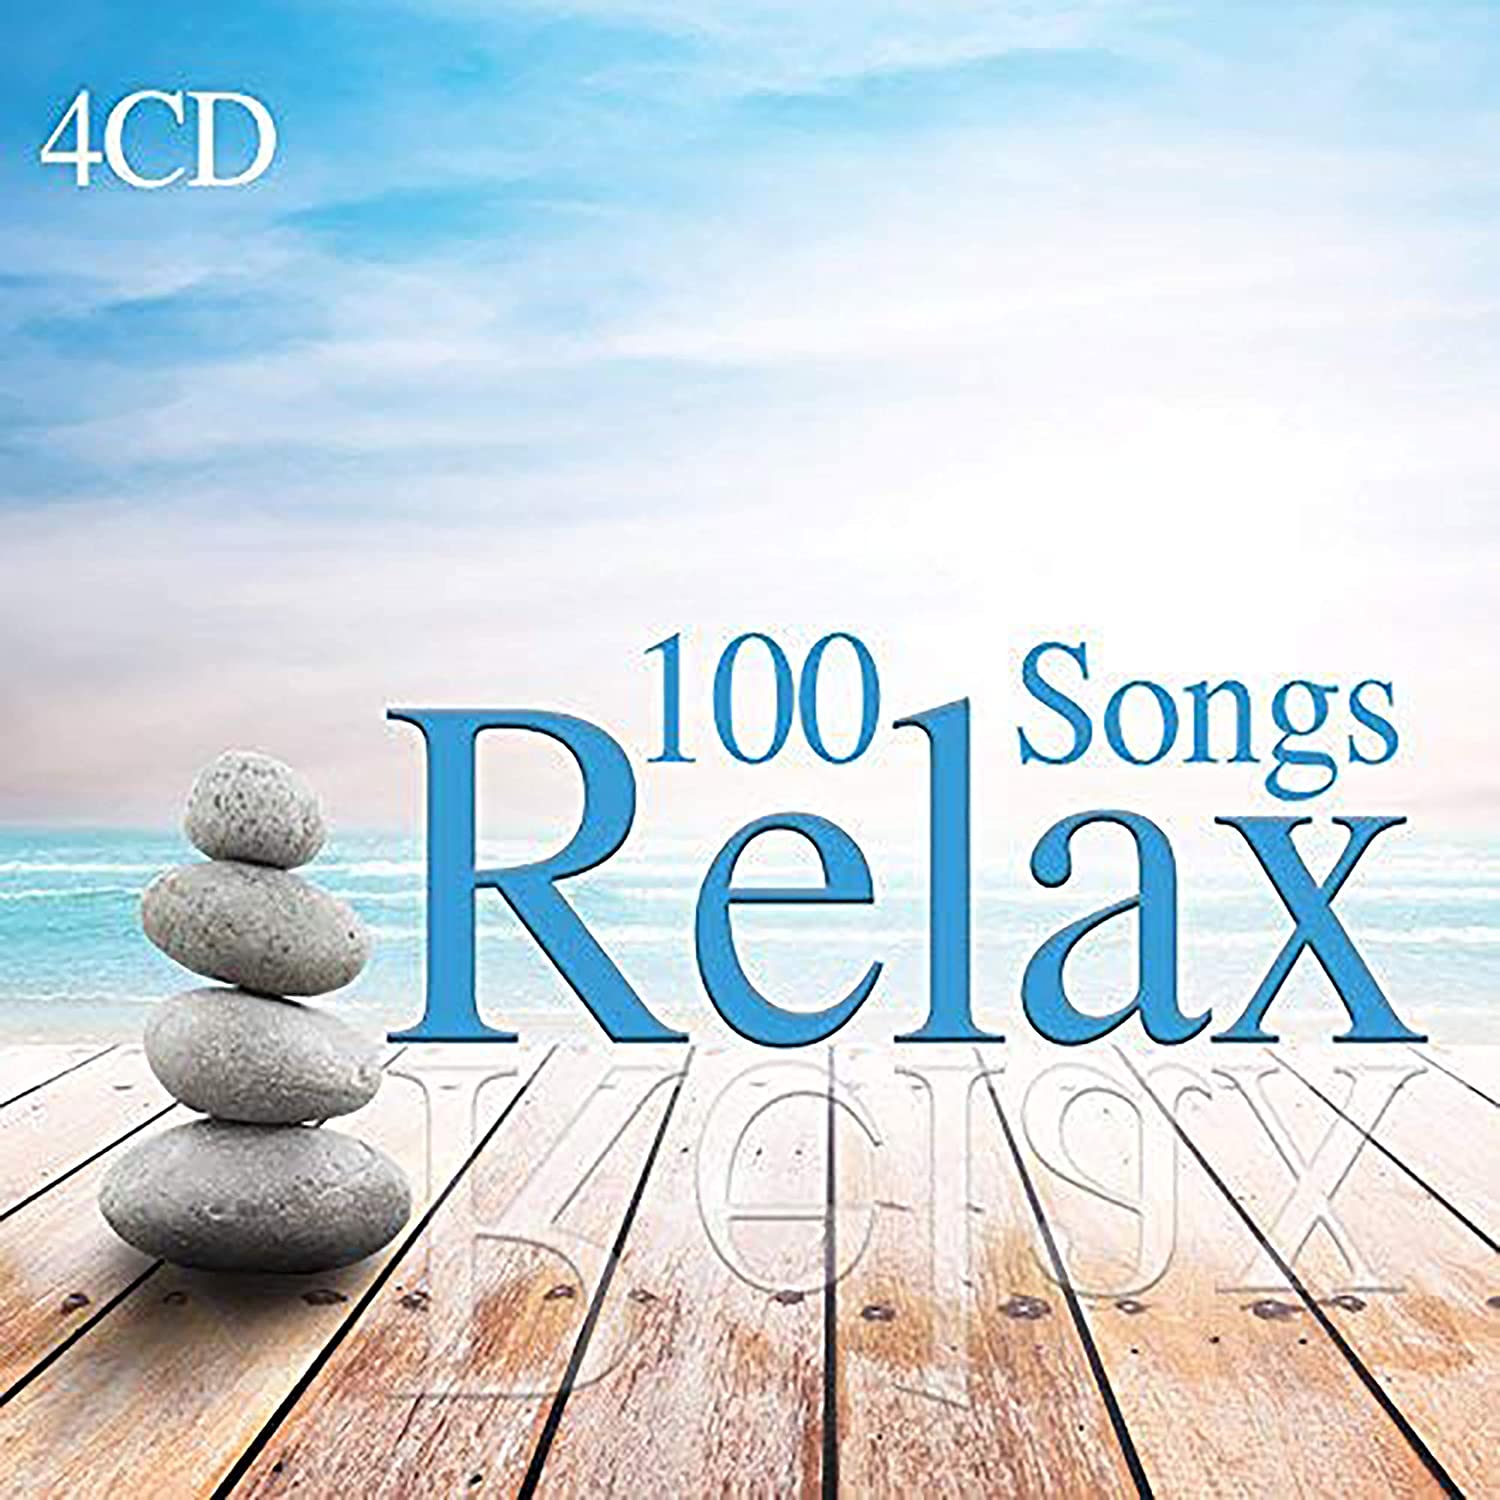 100 Songs Relax - Instrumental Relaxing Music, Nature Sounds, Lounge, Chillout, Spa and Meditation Music